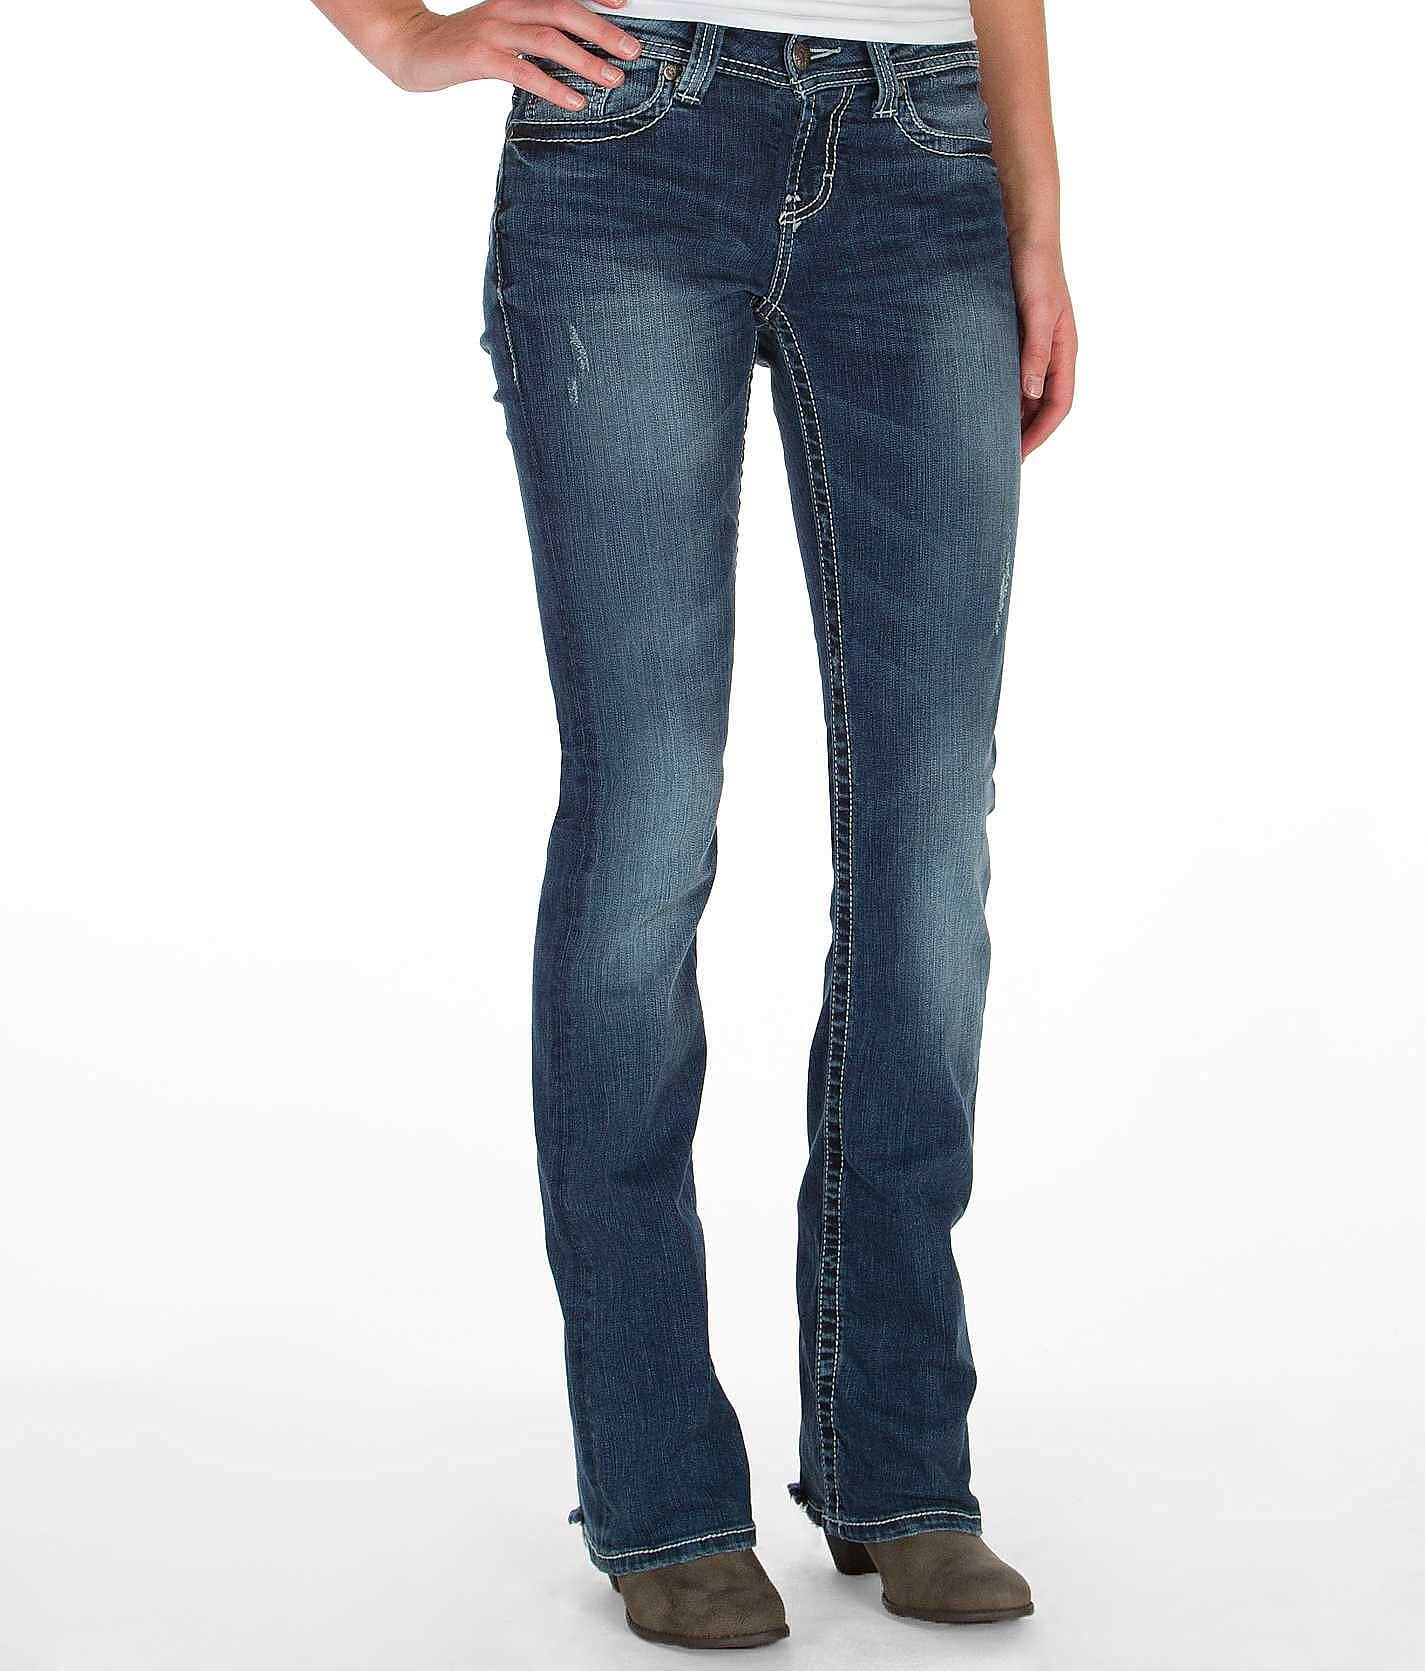 buckle culture jeans